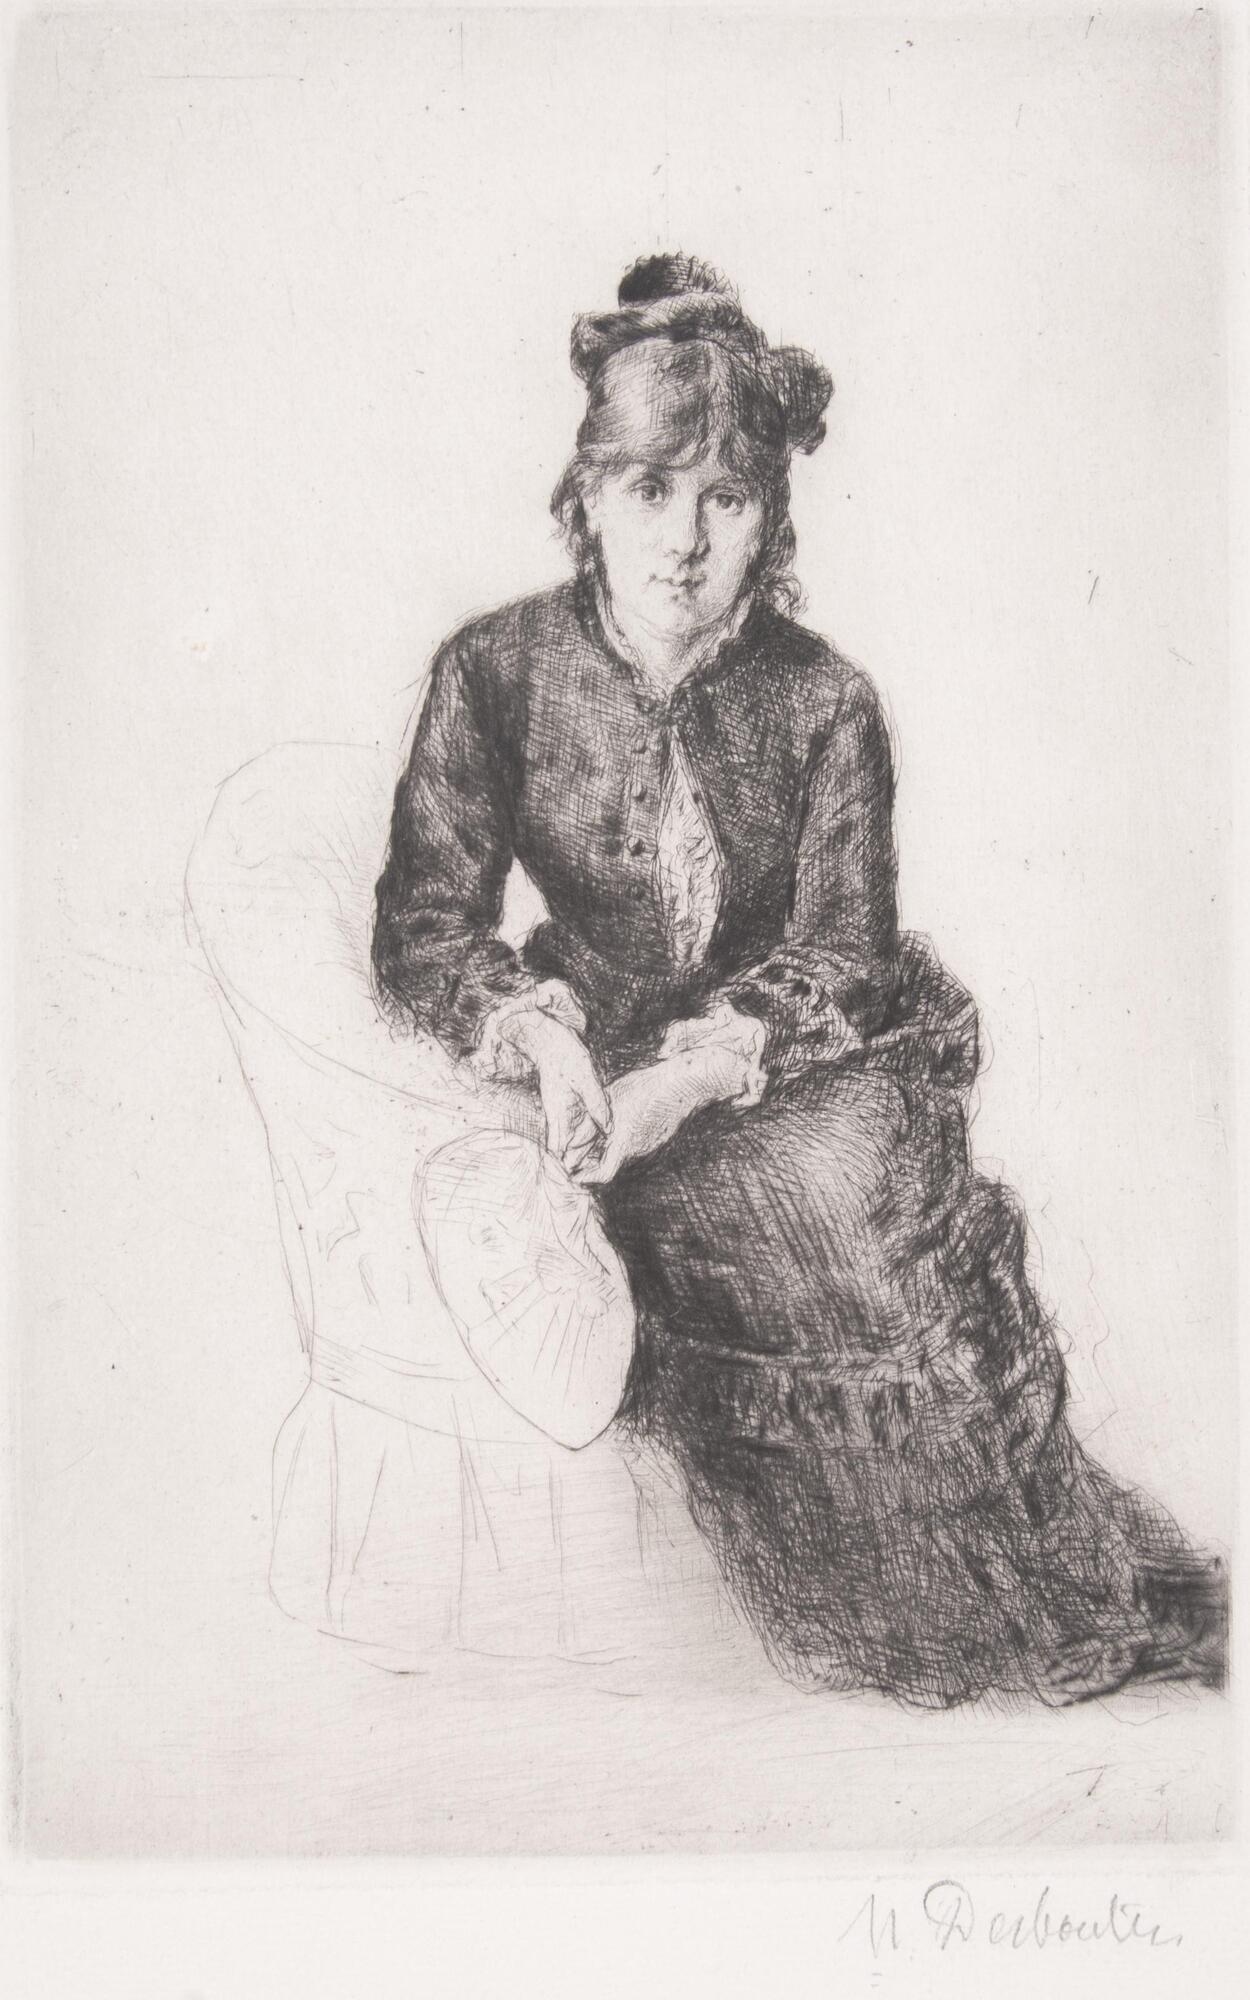 A drypoint portrait of a woman seated on a chair, holding a fan and looking out toward the viewer.